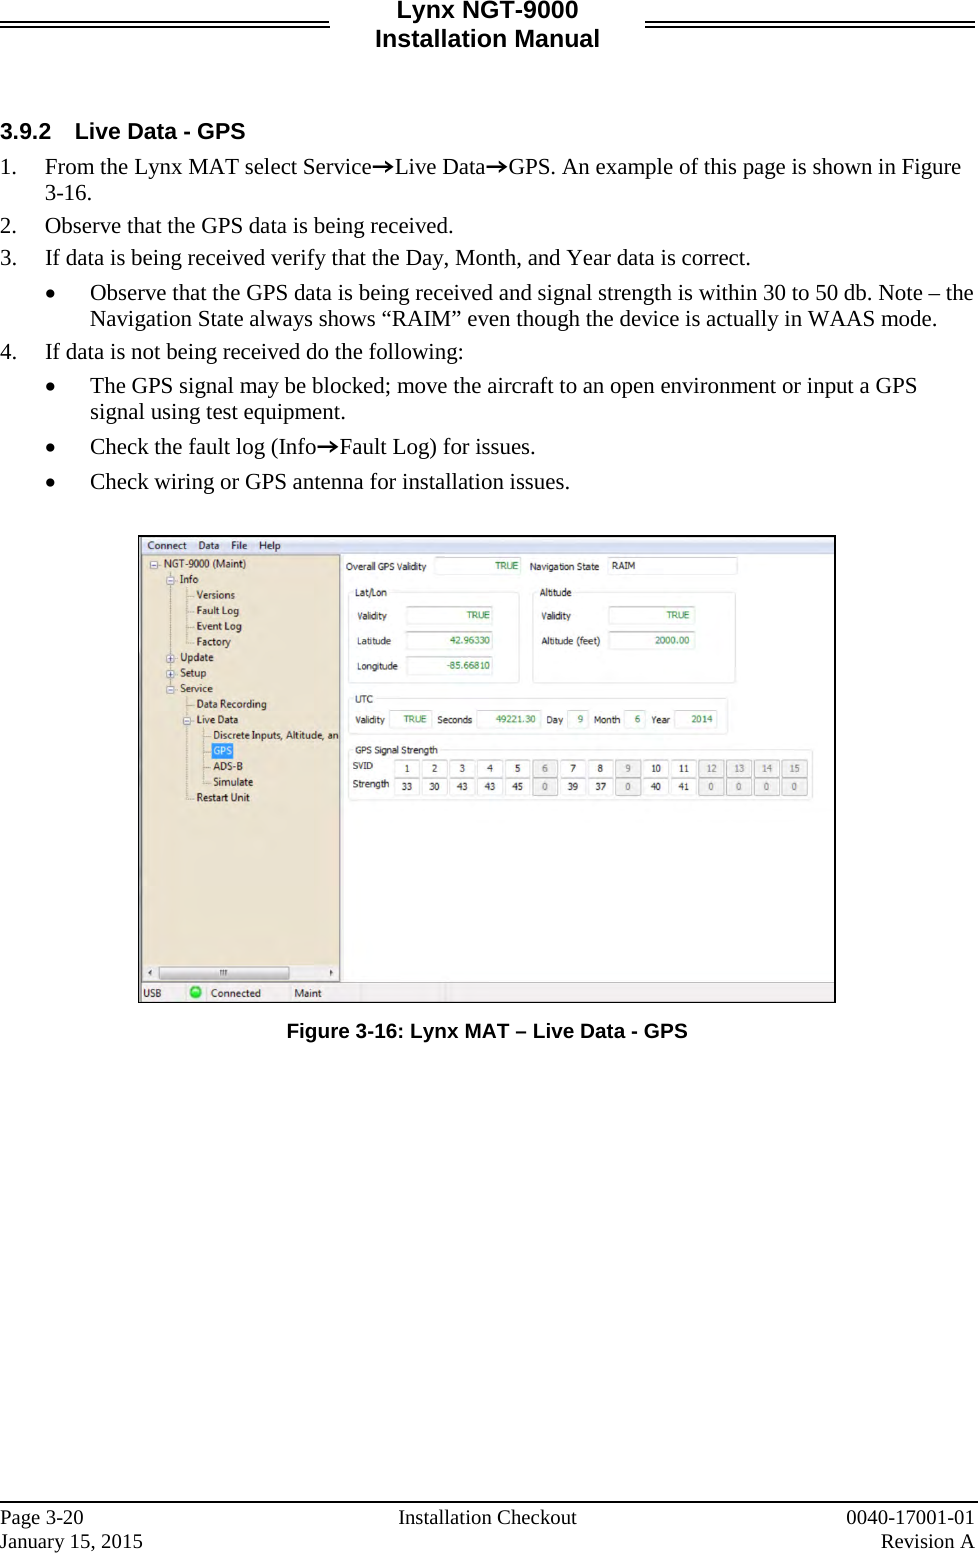 Lynx NGT-9000 Installation Manual   3.9.2 Live Data - GPS 1. From the Lynx MAT select ServiceZLive DataZGPS. An example of this page is shown in Figure 3-16.  2. Observe that the GPS data is being received.  3. If data is being received verify that the Day, Month, and Year data is correct.  • Observe that the GPS data is being received and signal strength is within 30 to 50 db. Note – the Navigation State always shows “RAIM” even though the device is actually in WAAS mode. 4. If data is not being received do the following: • The GPS signal may be blocked; move the aircraft to an open environment or input a GPS signal using test equipment.  • Check the fault log (InfoZFault Log) for issues.  • Check wiring or GPS antenna for installation issues.   Figure 3-16: Lynx MAT – Live Data - GPS    Page 3-20   Installation Checkout 0040-17001-01 January 15, 2015    Revision A  